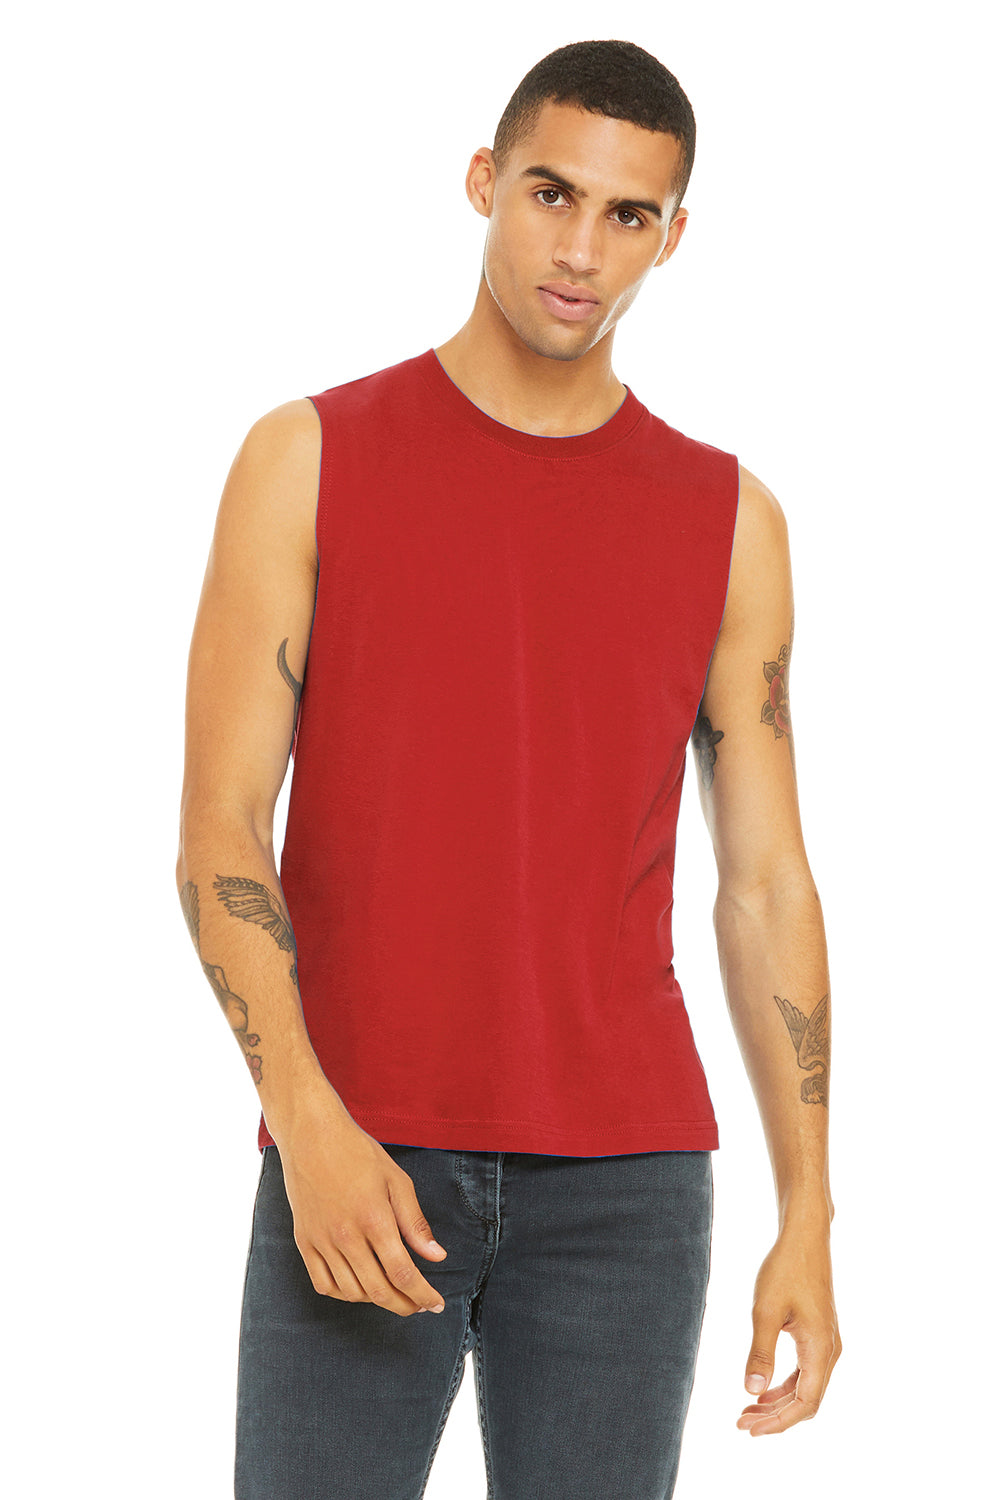 Bella + Canvas 3483 Mens Jersey Muscle Tank Top Red Front